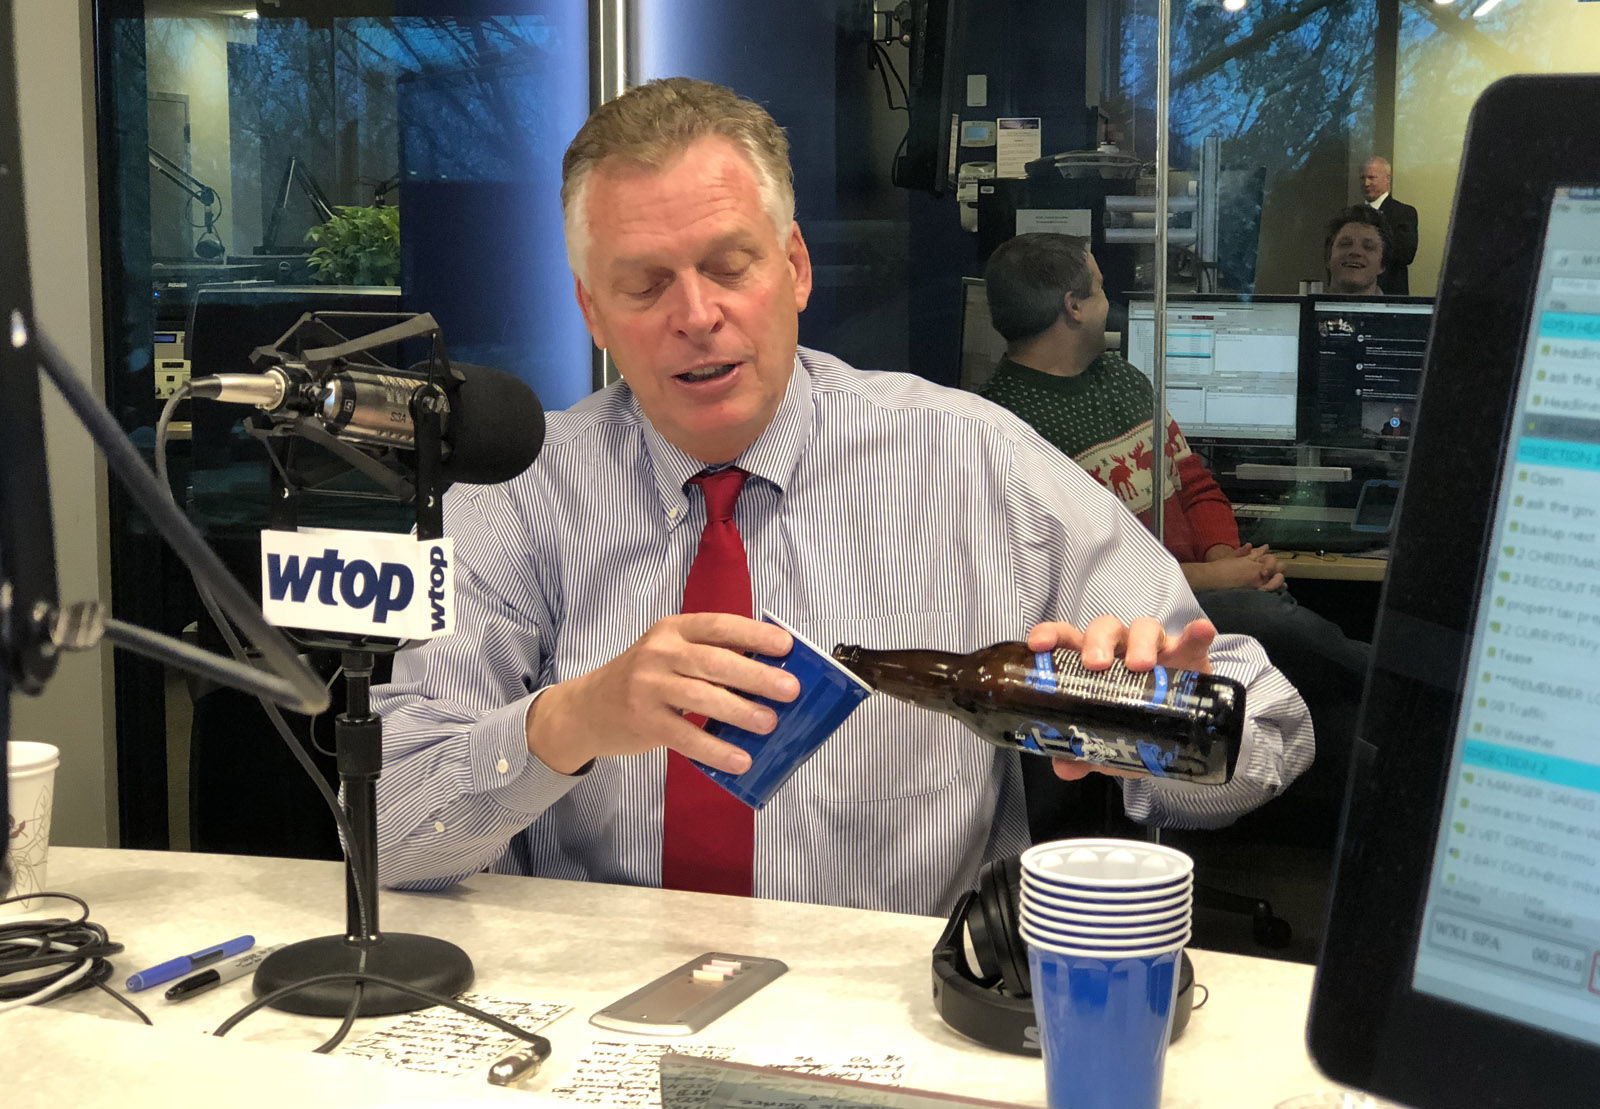 Virginia Gov. Terry McAuliffe pours a beer in the Glass Enclosed Nerve Center on Friday, Dec. 22, 2017, to toast his 38th and final appearance on "Ask the Governor." He picked the ingredients used to make the Give Me Stout or Give me Death, a colaboration among three Virginia breweries: Stone, Hardywood and Ardent. (WTOP/Omama Altaleb)